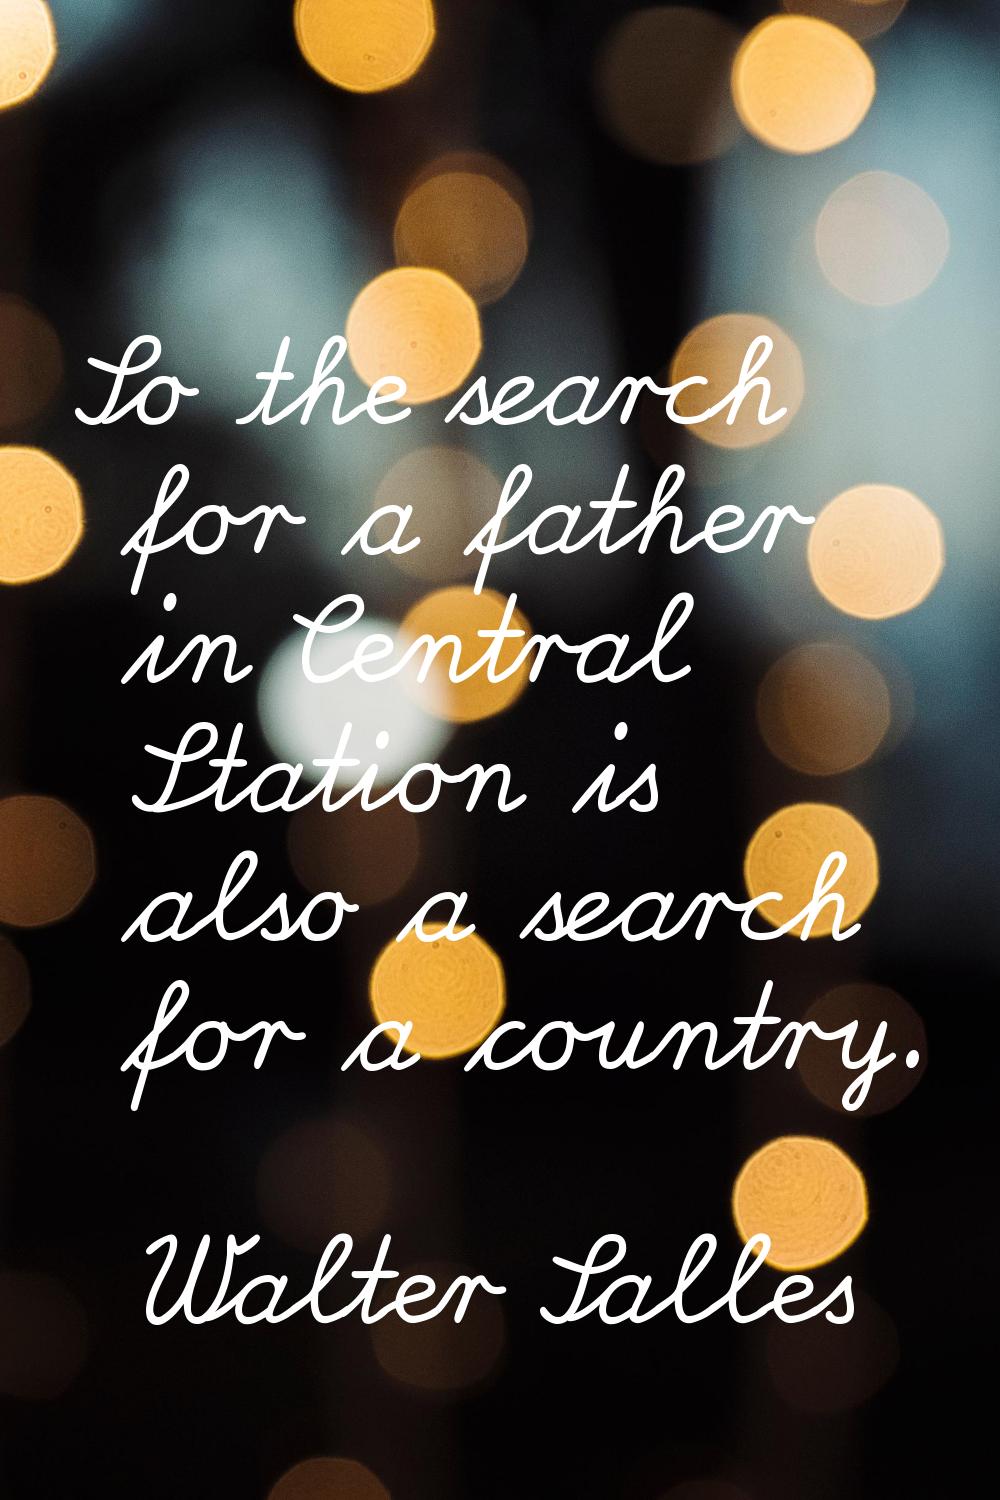 So the search for a father in Central Station is also a search for a country.